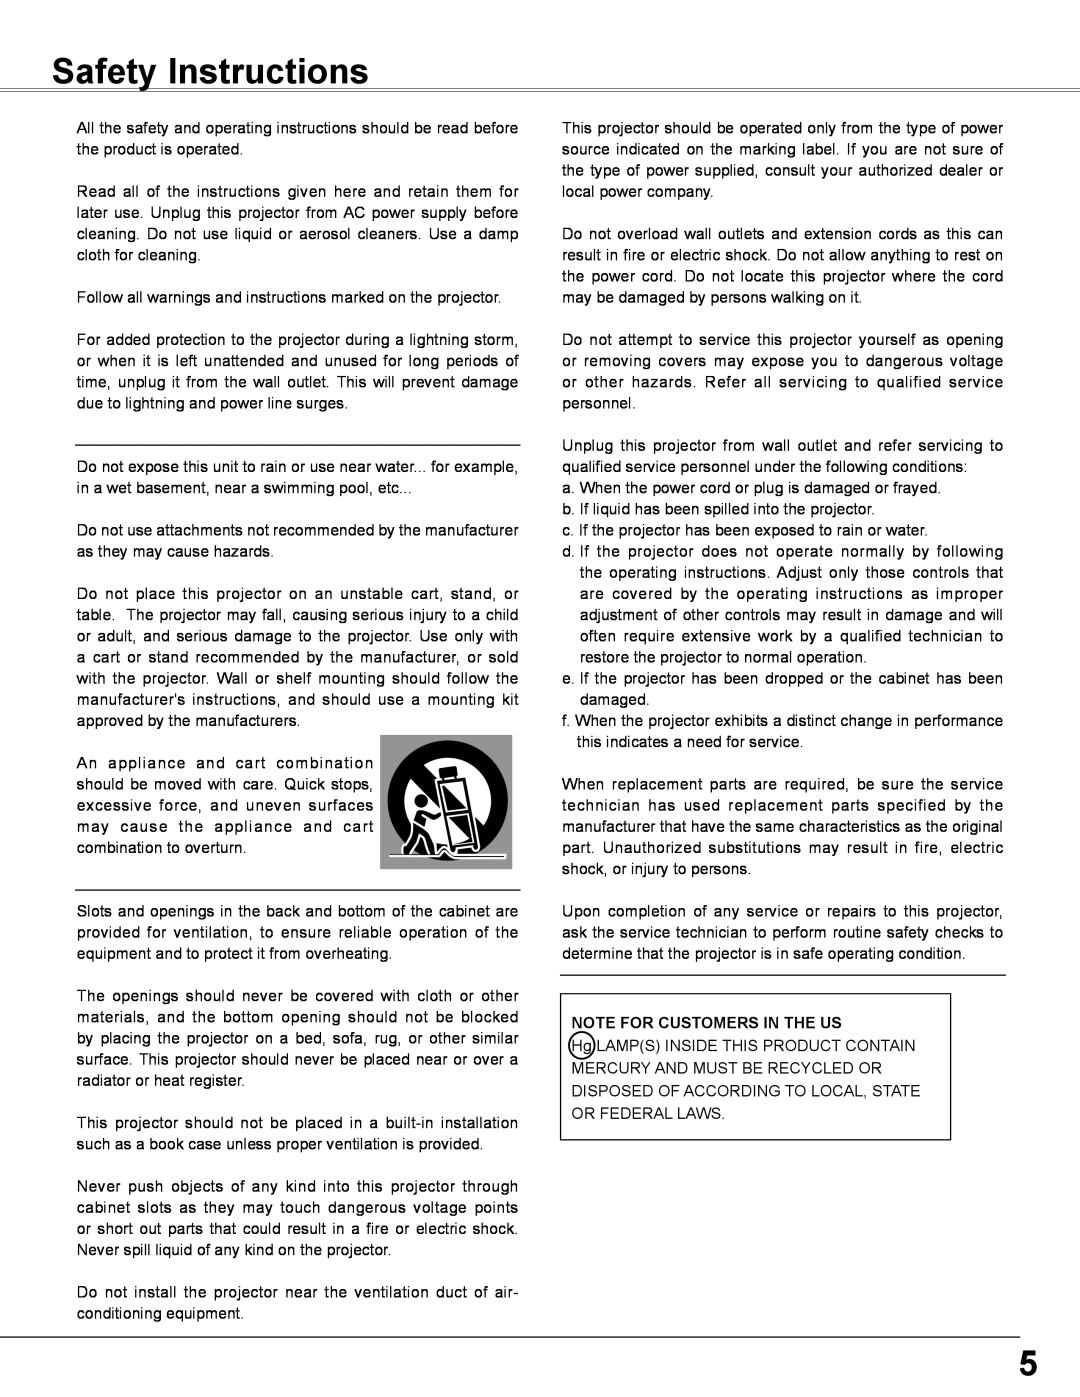 Sanyo PLC-WXE46 owner manual Safety Instructions, Note For Customers In The Us 